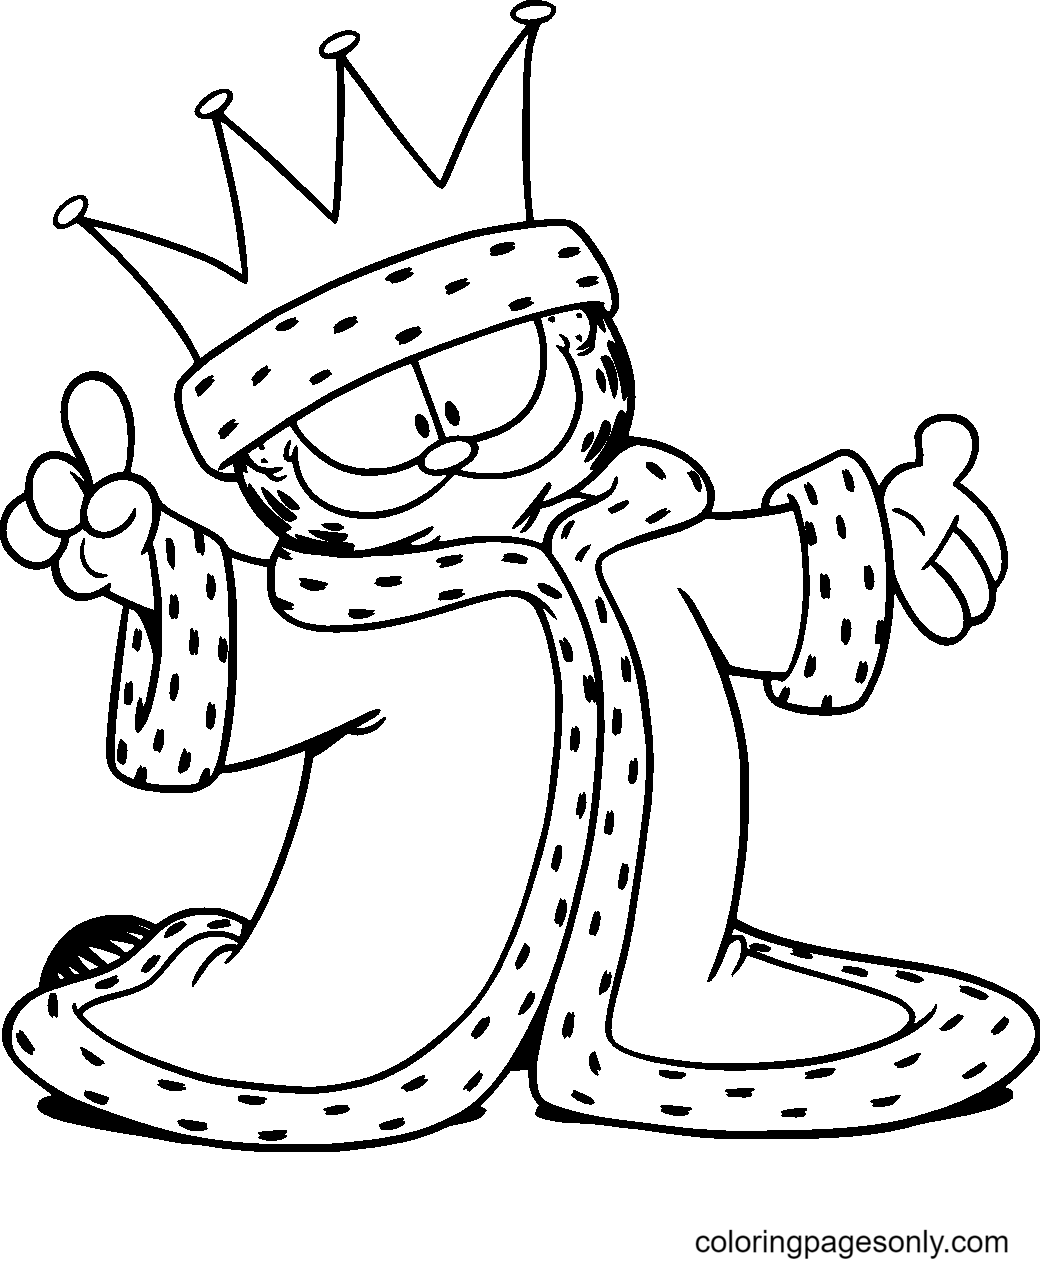 King Garfield Coloring Pages